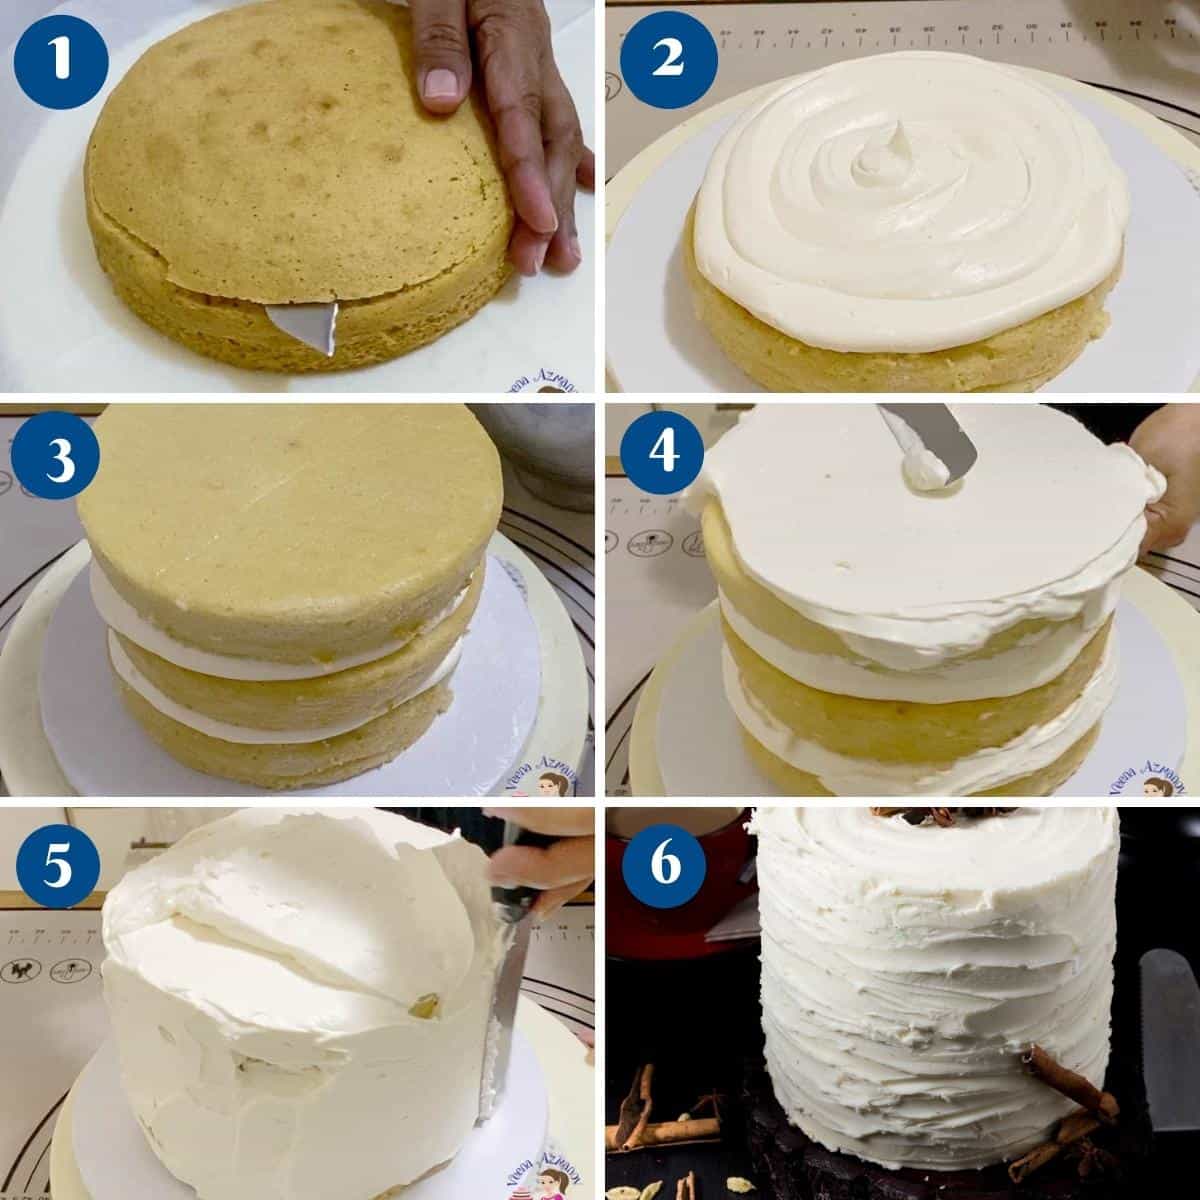 Progress pictures stacking the chai layer cake.